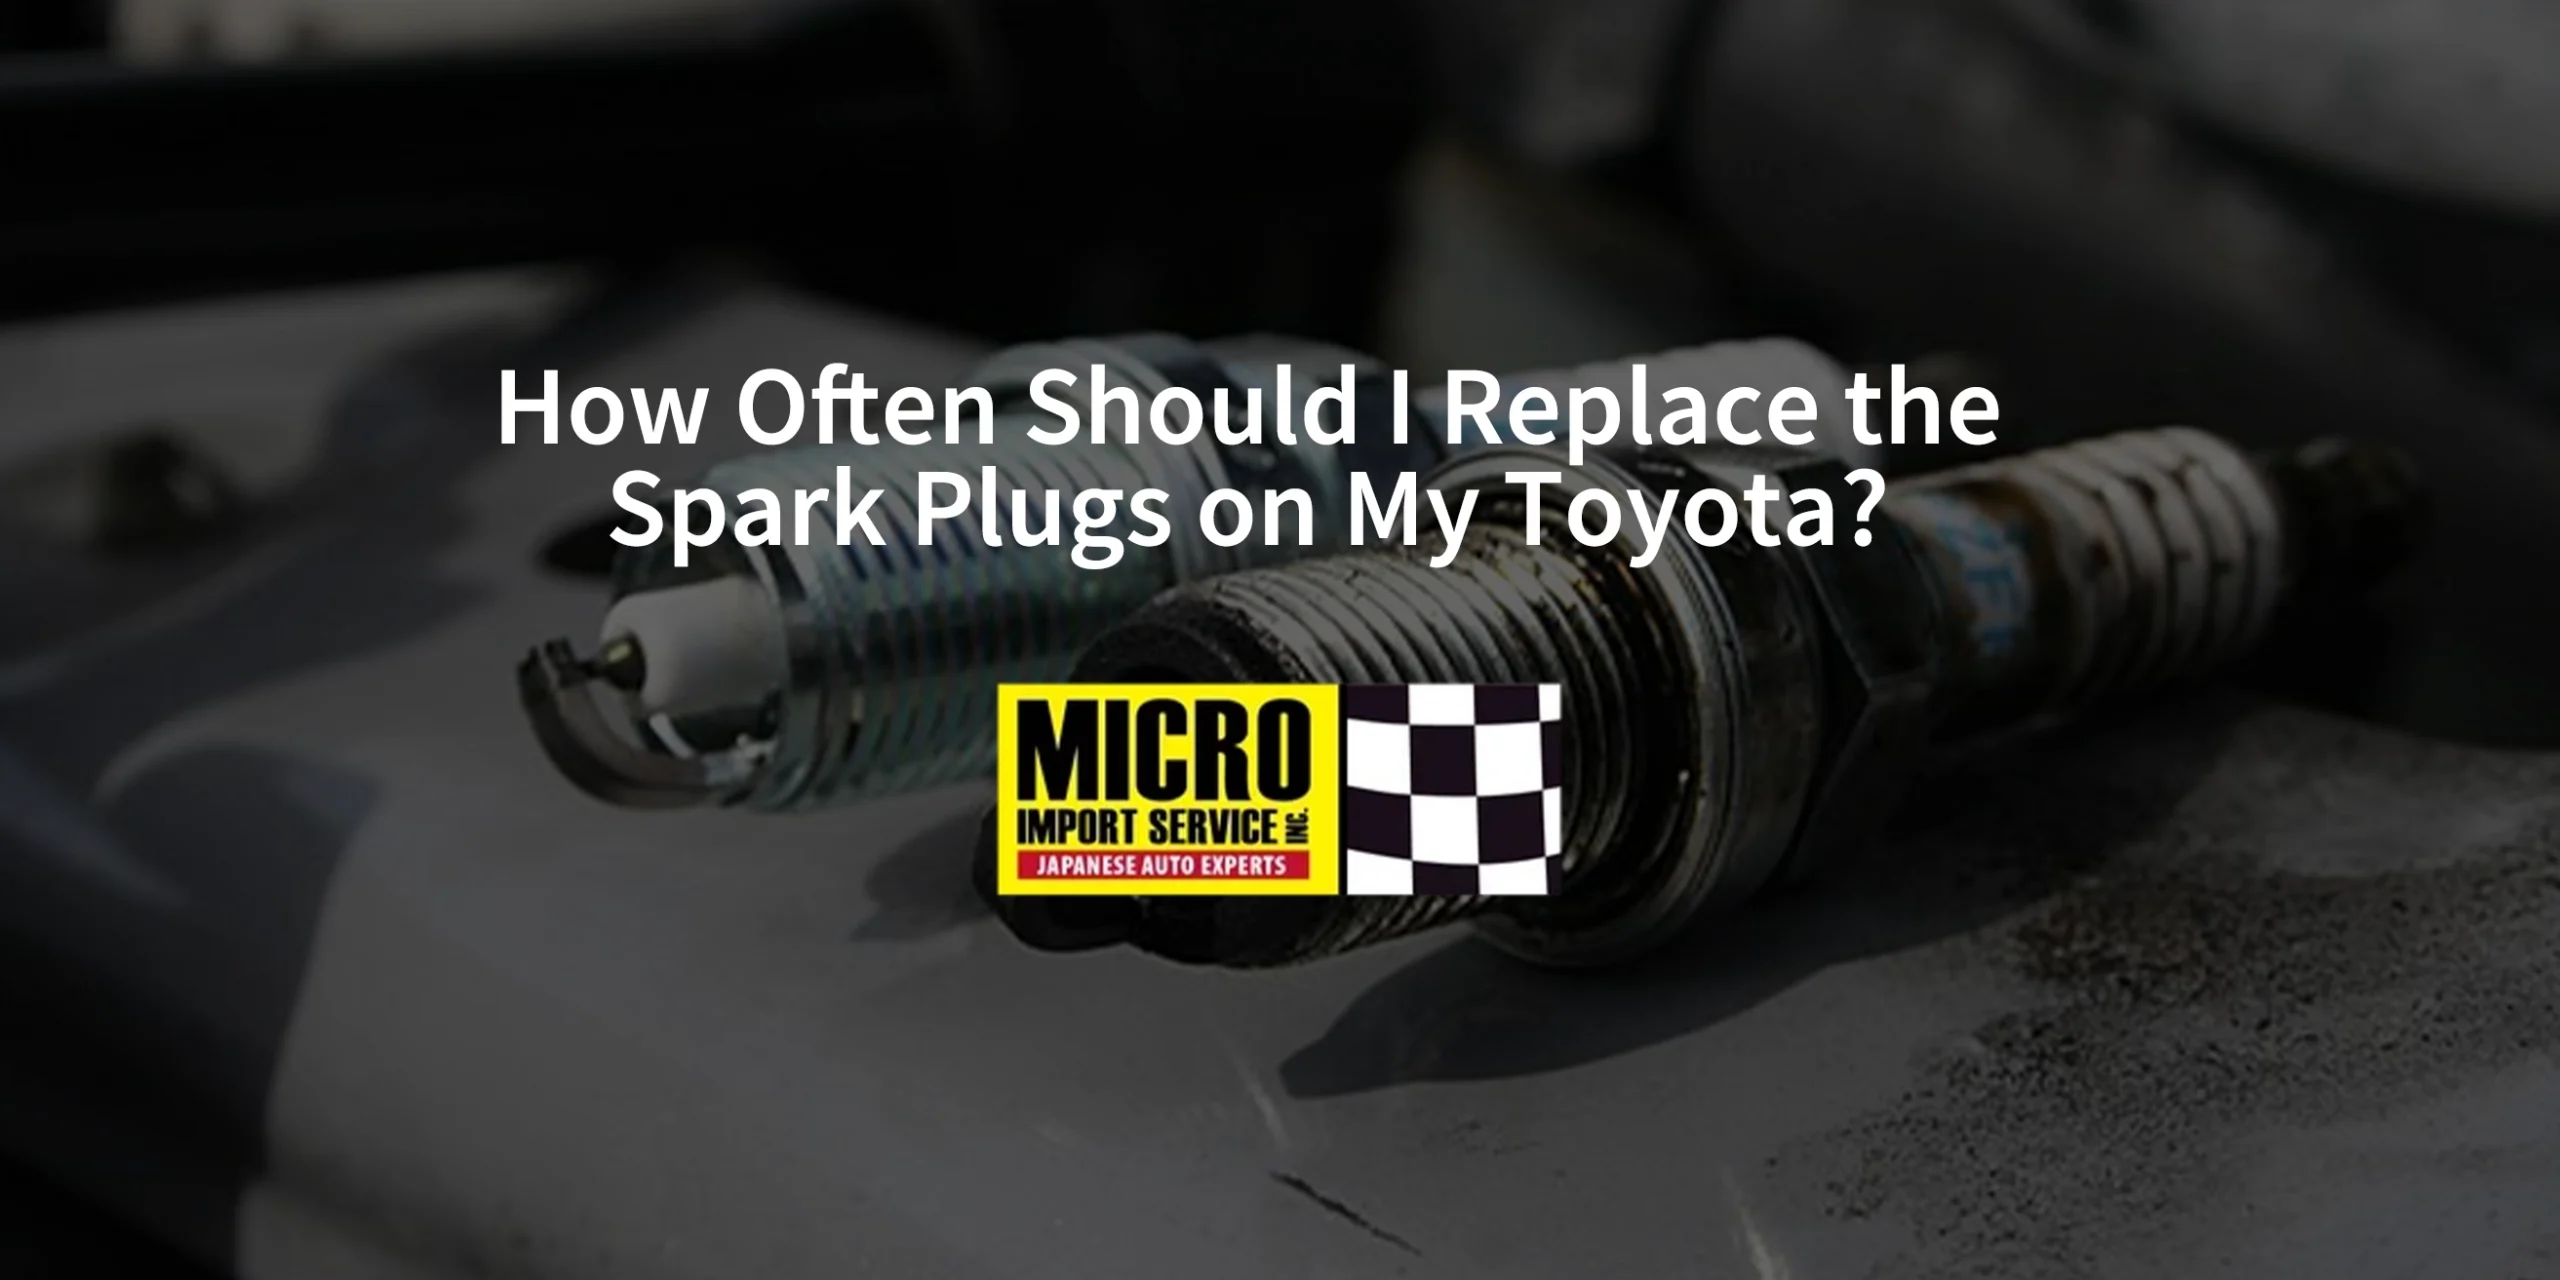 How Often Should I Replace the Spark Plugs on My Toyota?